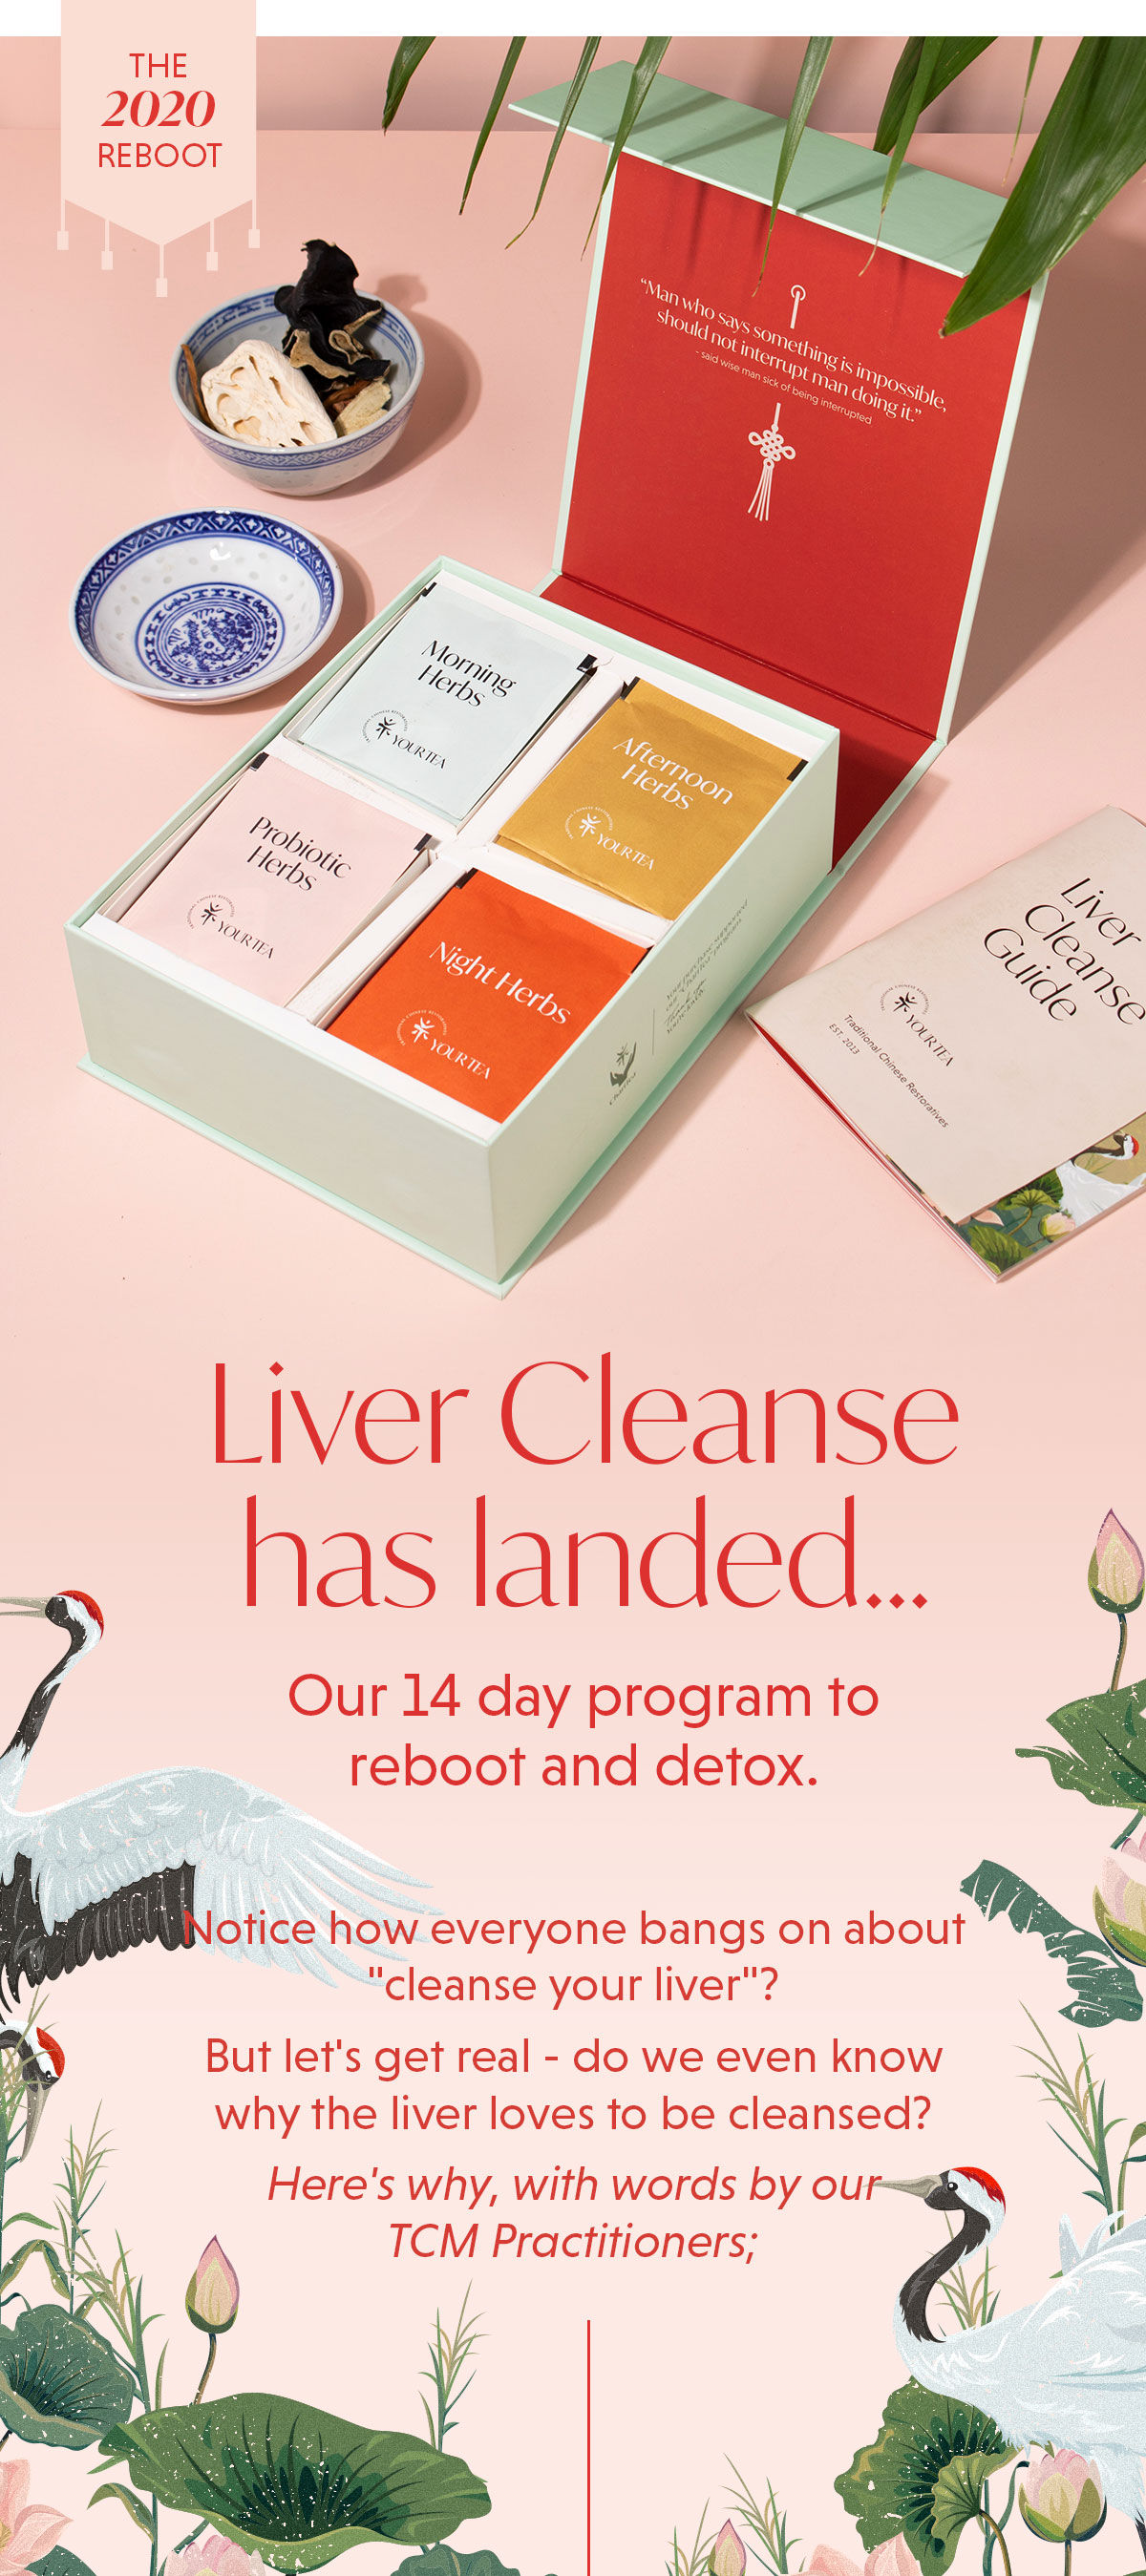 Liver Cleanse has landed